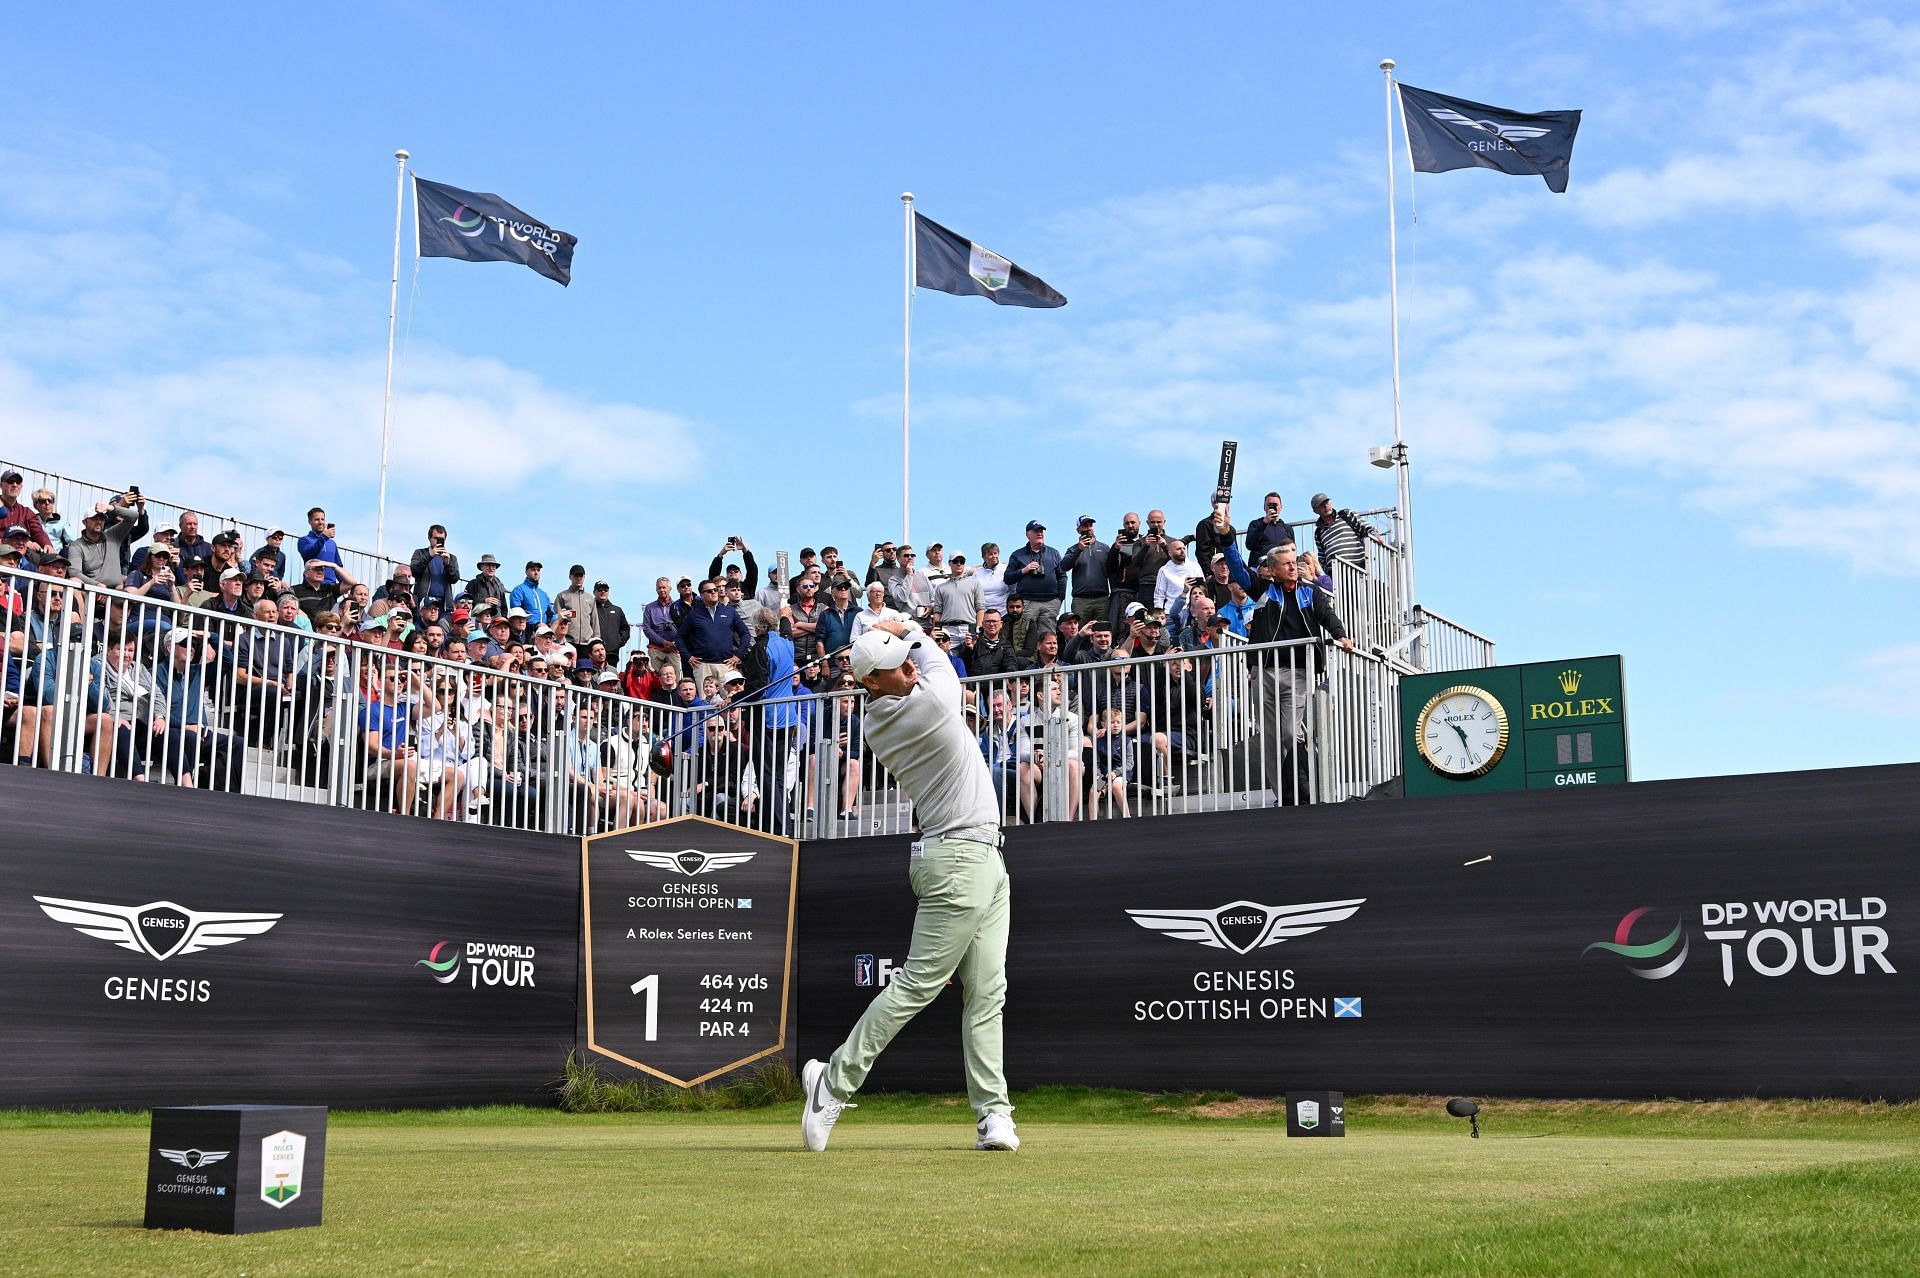 Rory McIlroy using his TaylorMade SIM2 (10.5 degrees @8.5) drive at the Genesis Scottish Open (Image via Getty).